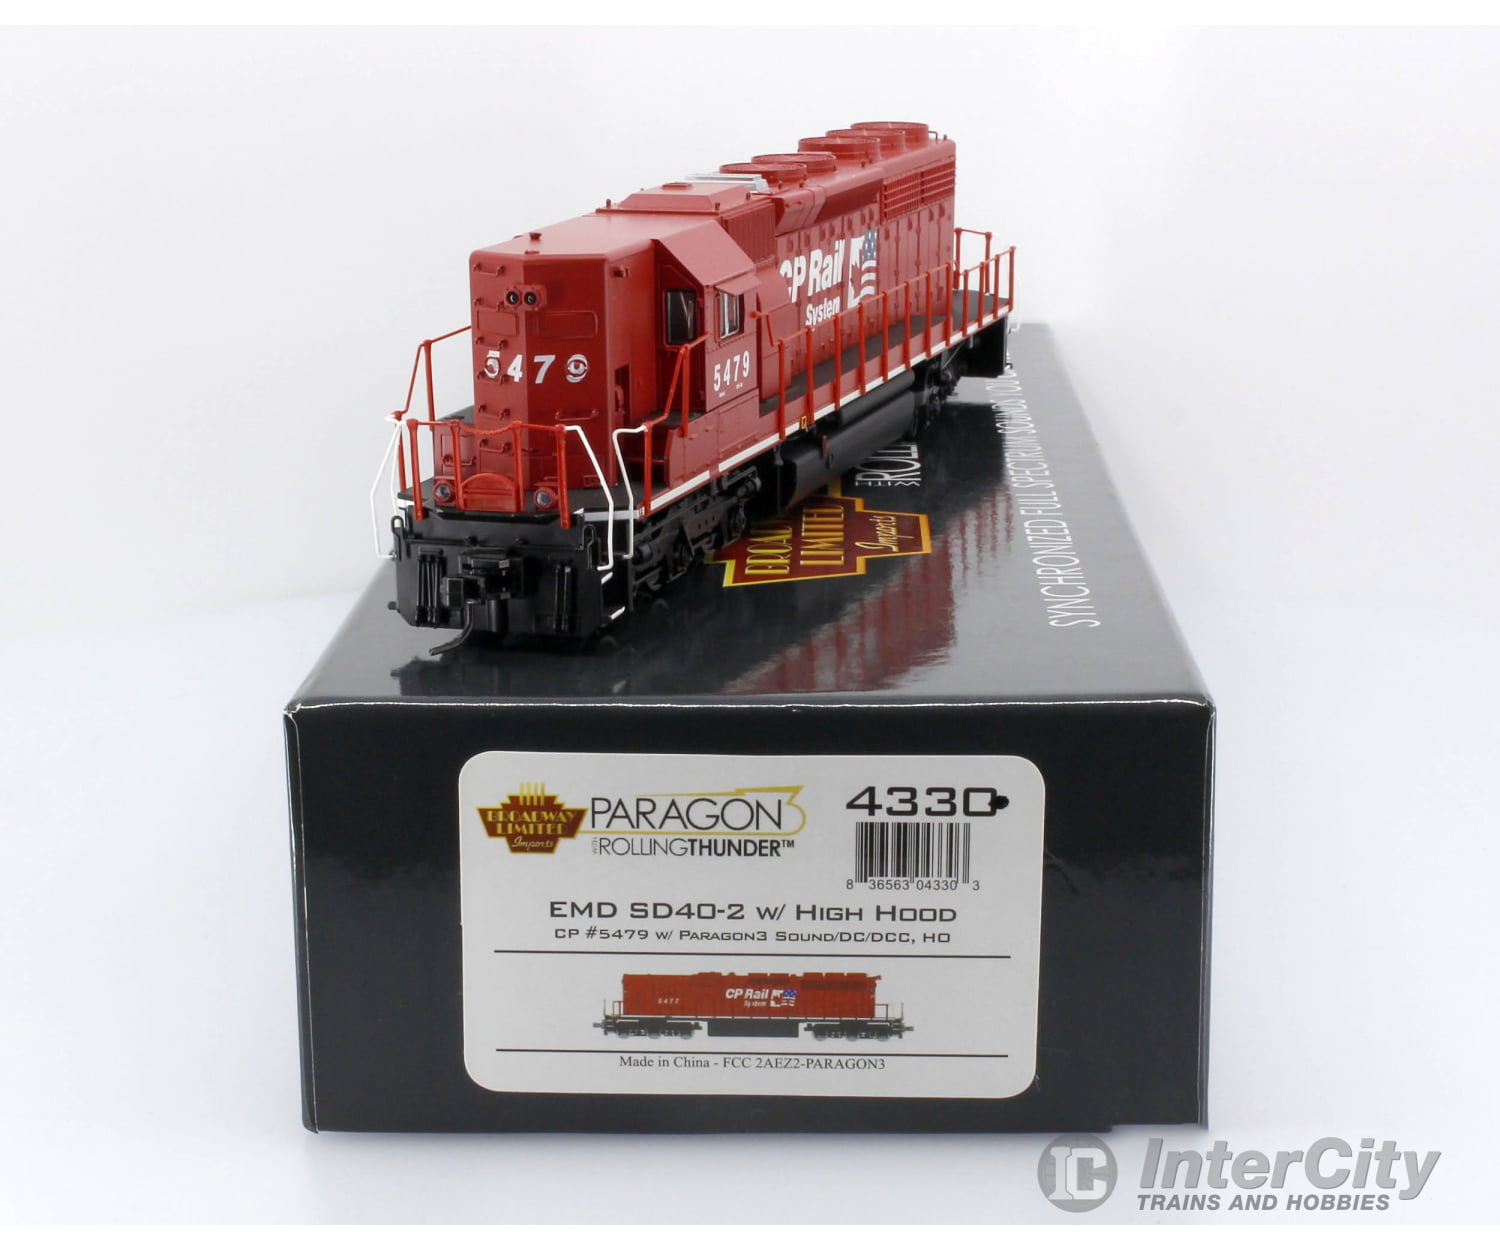 Broadway Limited Ho Scale Canadian Pacific Sd40-2 High-Nose Diesel Locomotive #5479 With Paragon3